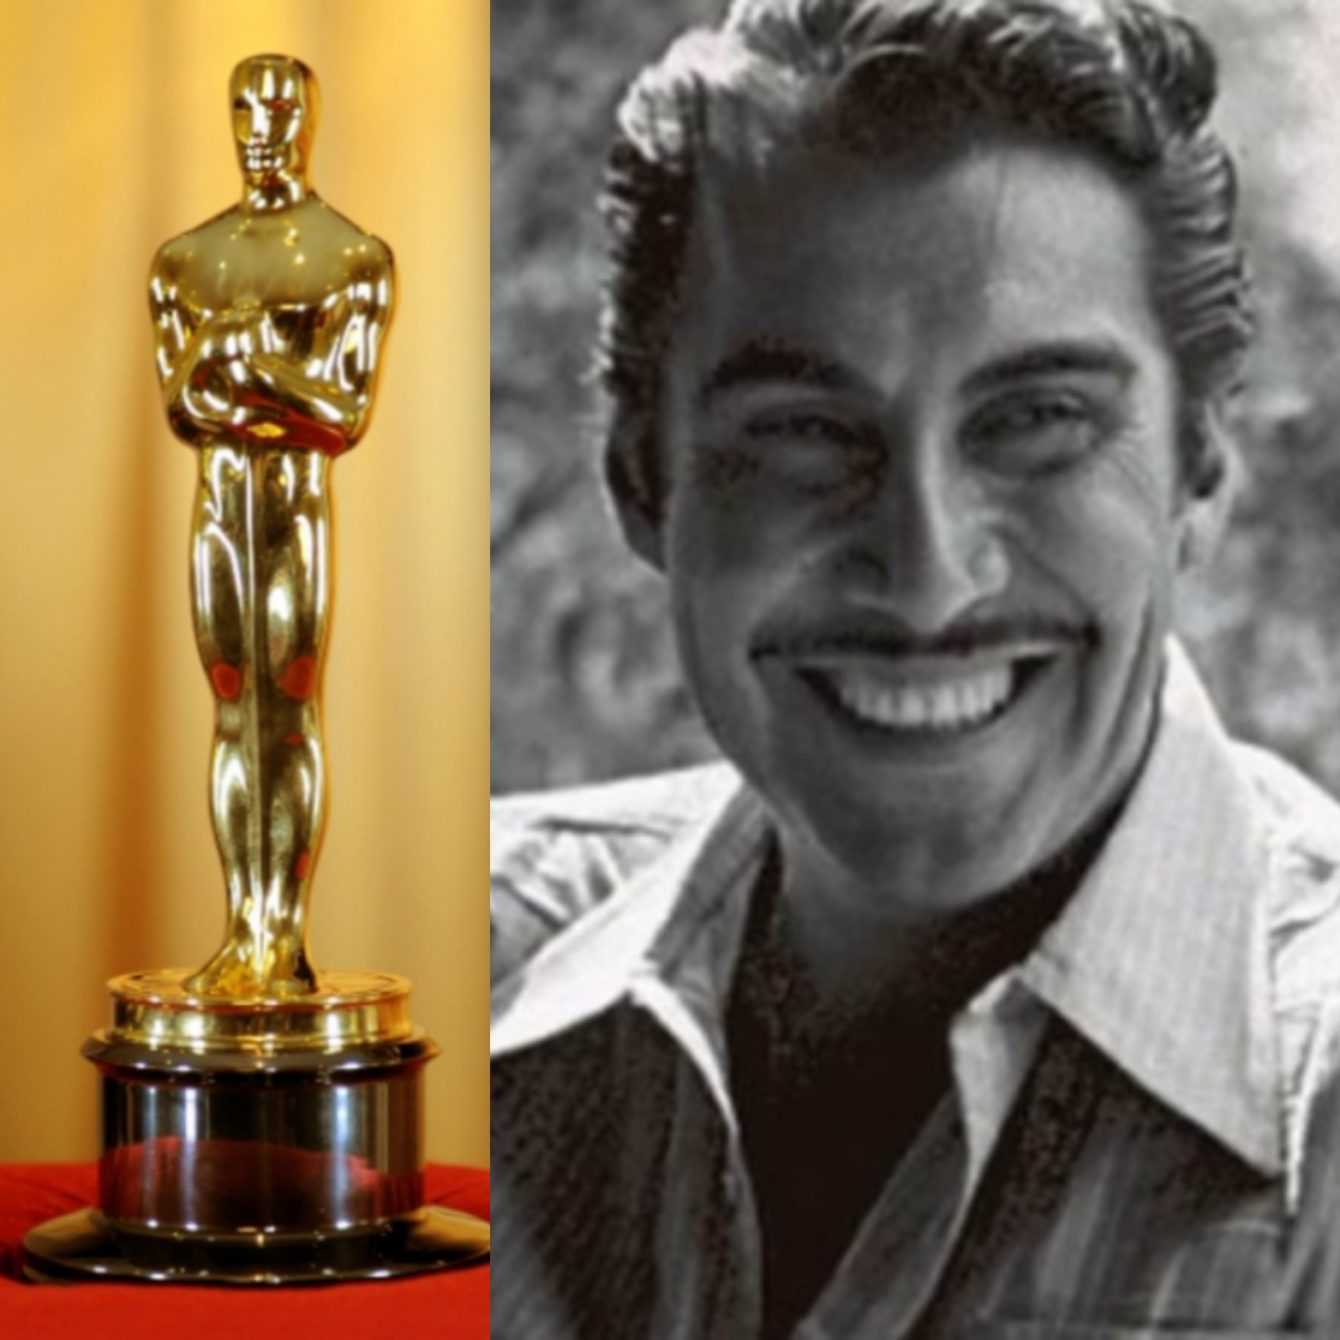 Who is the Oscar statuette inspired by?